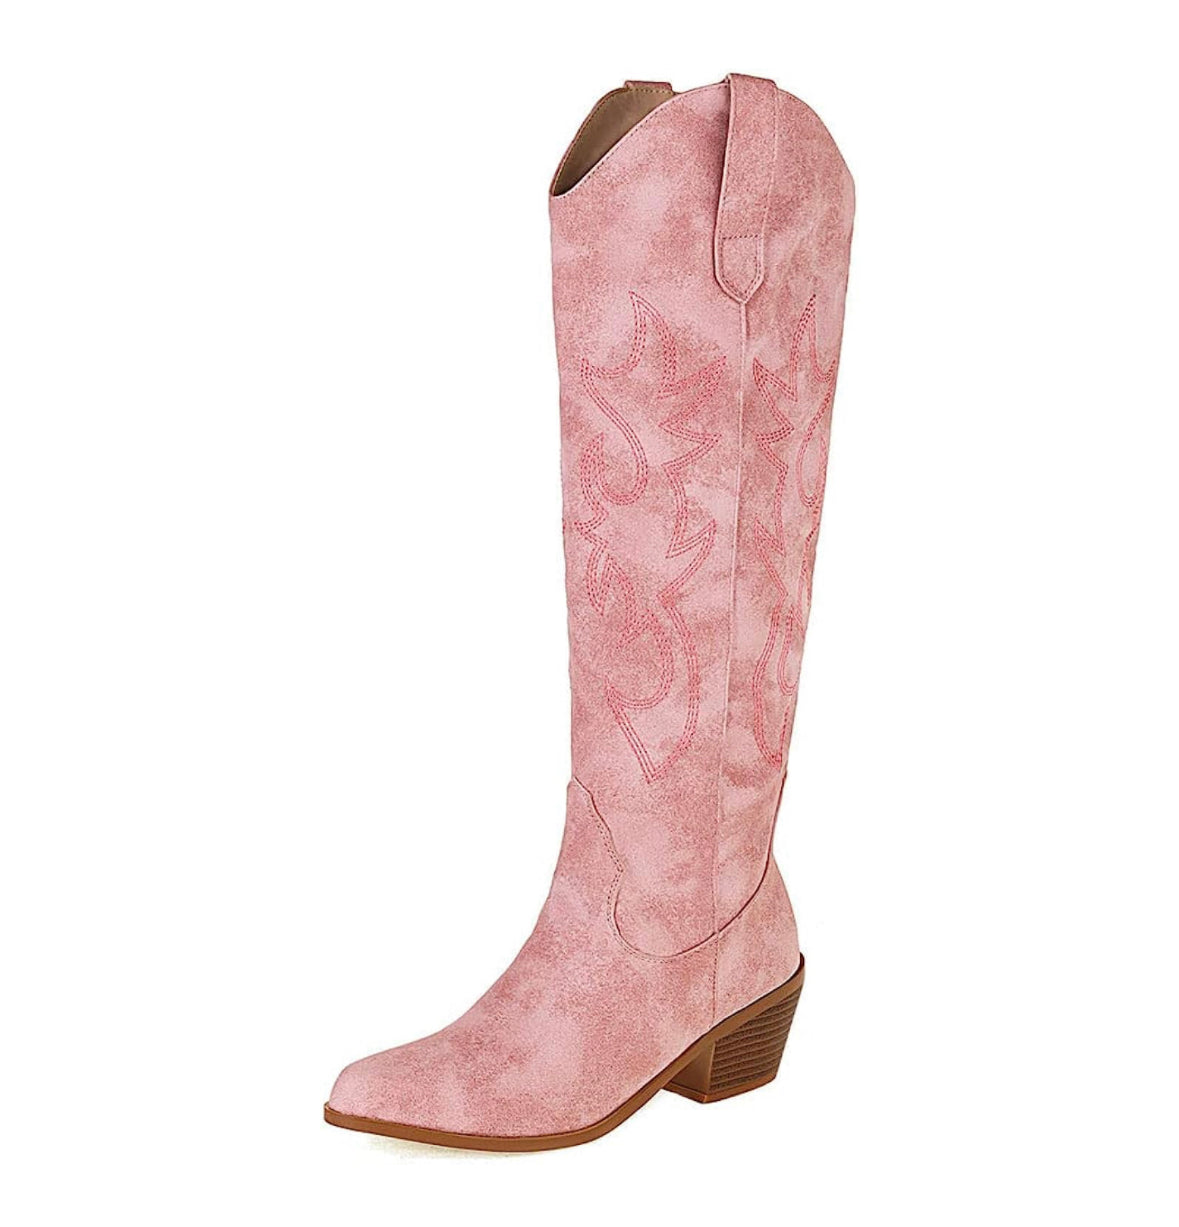 New Pink Pointed Toe Knee High Cowboy Boots Size EU 42 / US 11